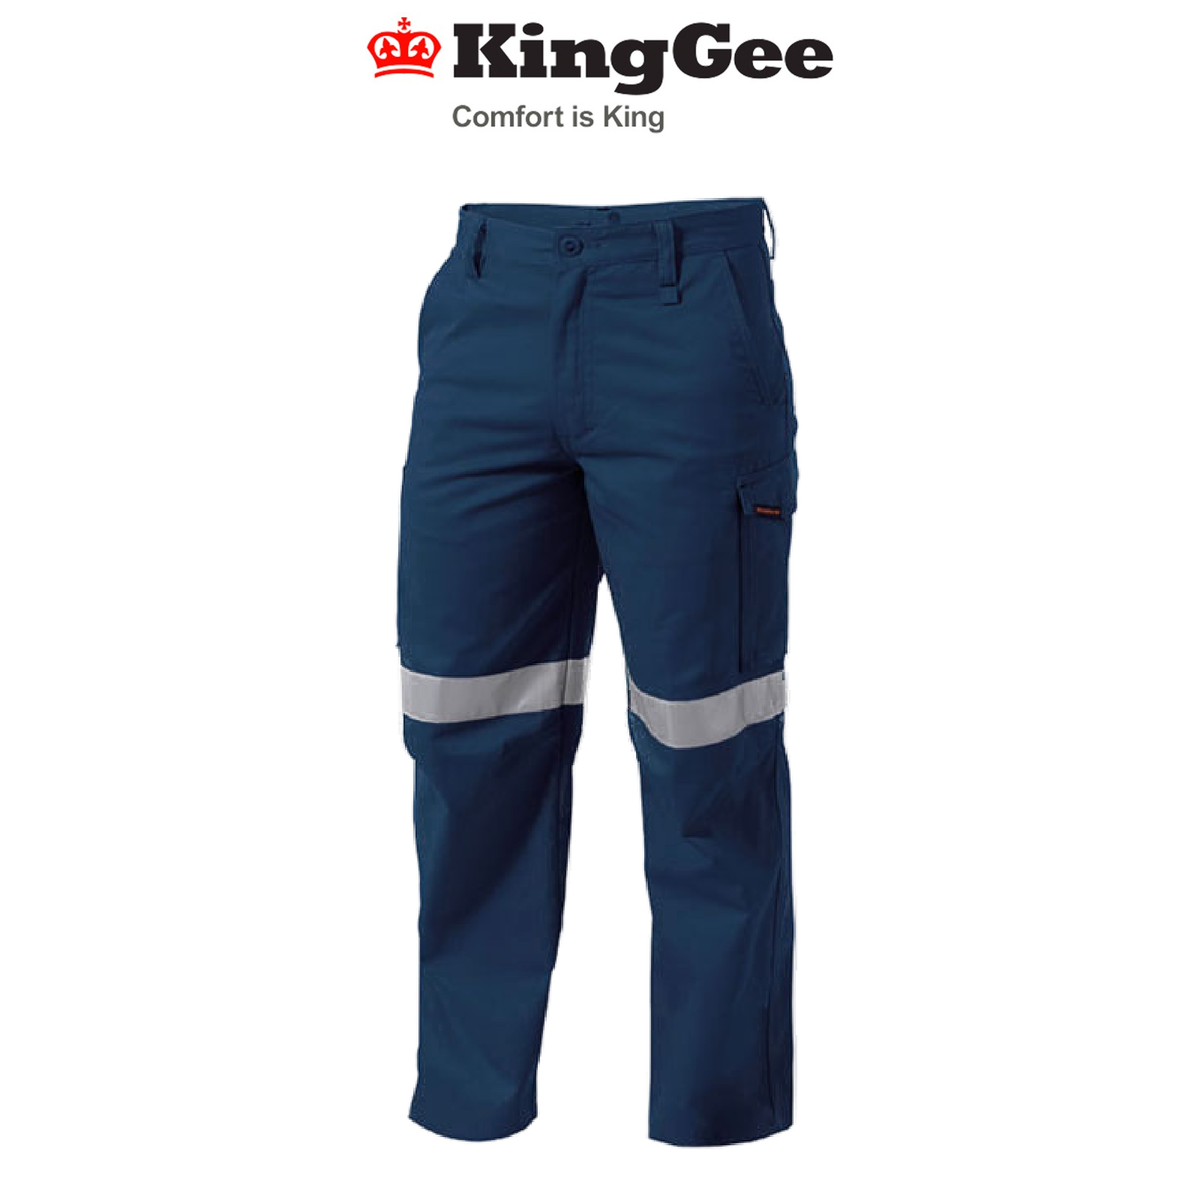 KingGee Mens Reflective WorkCool Pants Triple Stitching Taped Work Safety K53800